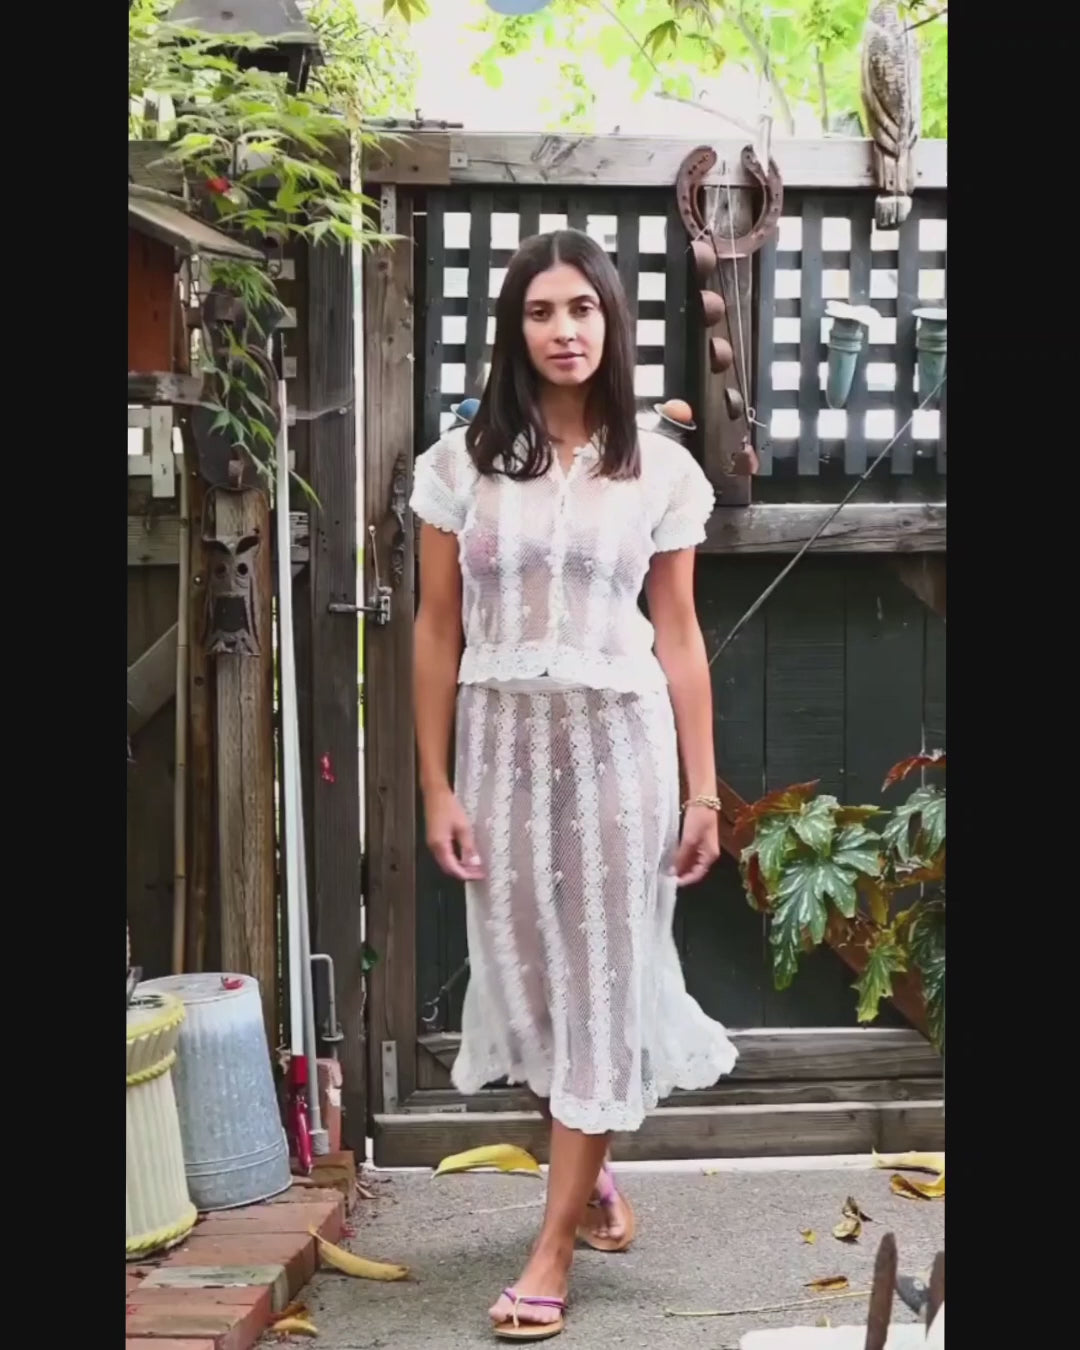 Video of model walking and twirling around in our two-piece hand crocheted button-up top and skirt set using sheer threads.  Color: White